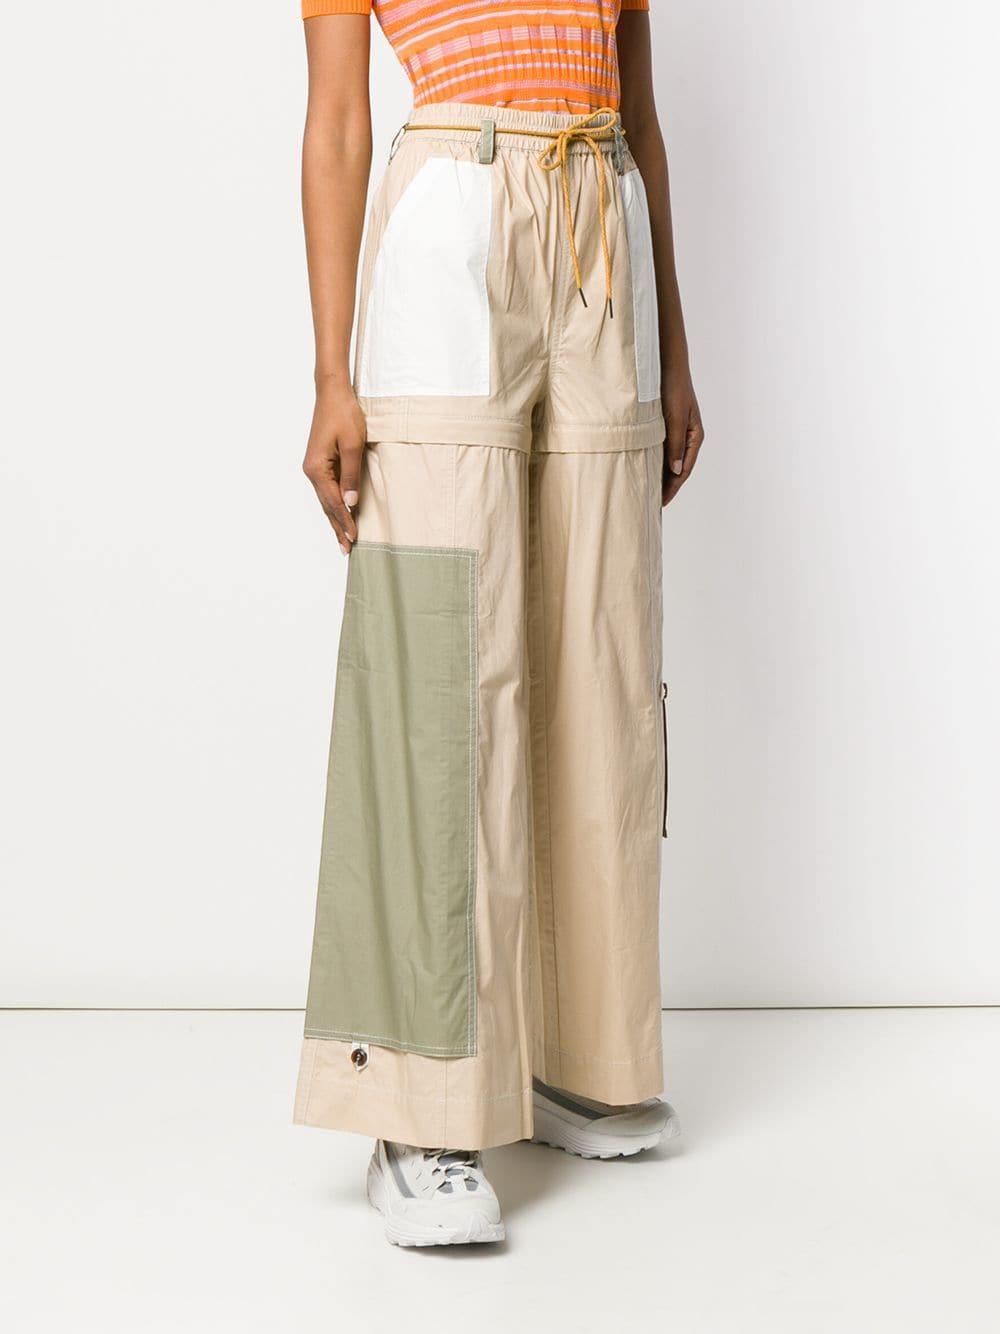 Ganni Cotton Convertible Trousers in Natural - Lyst